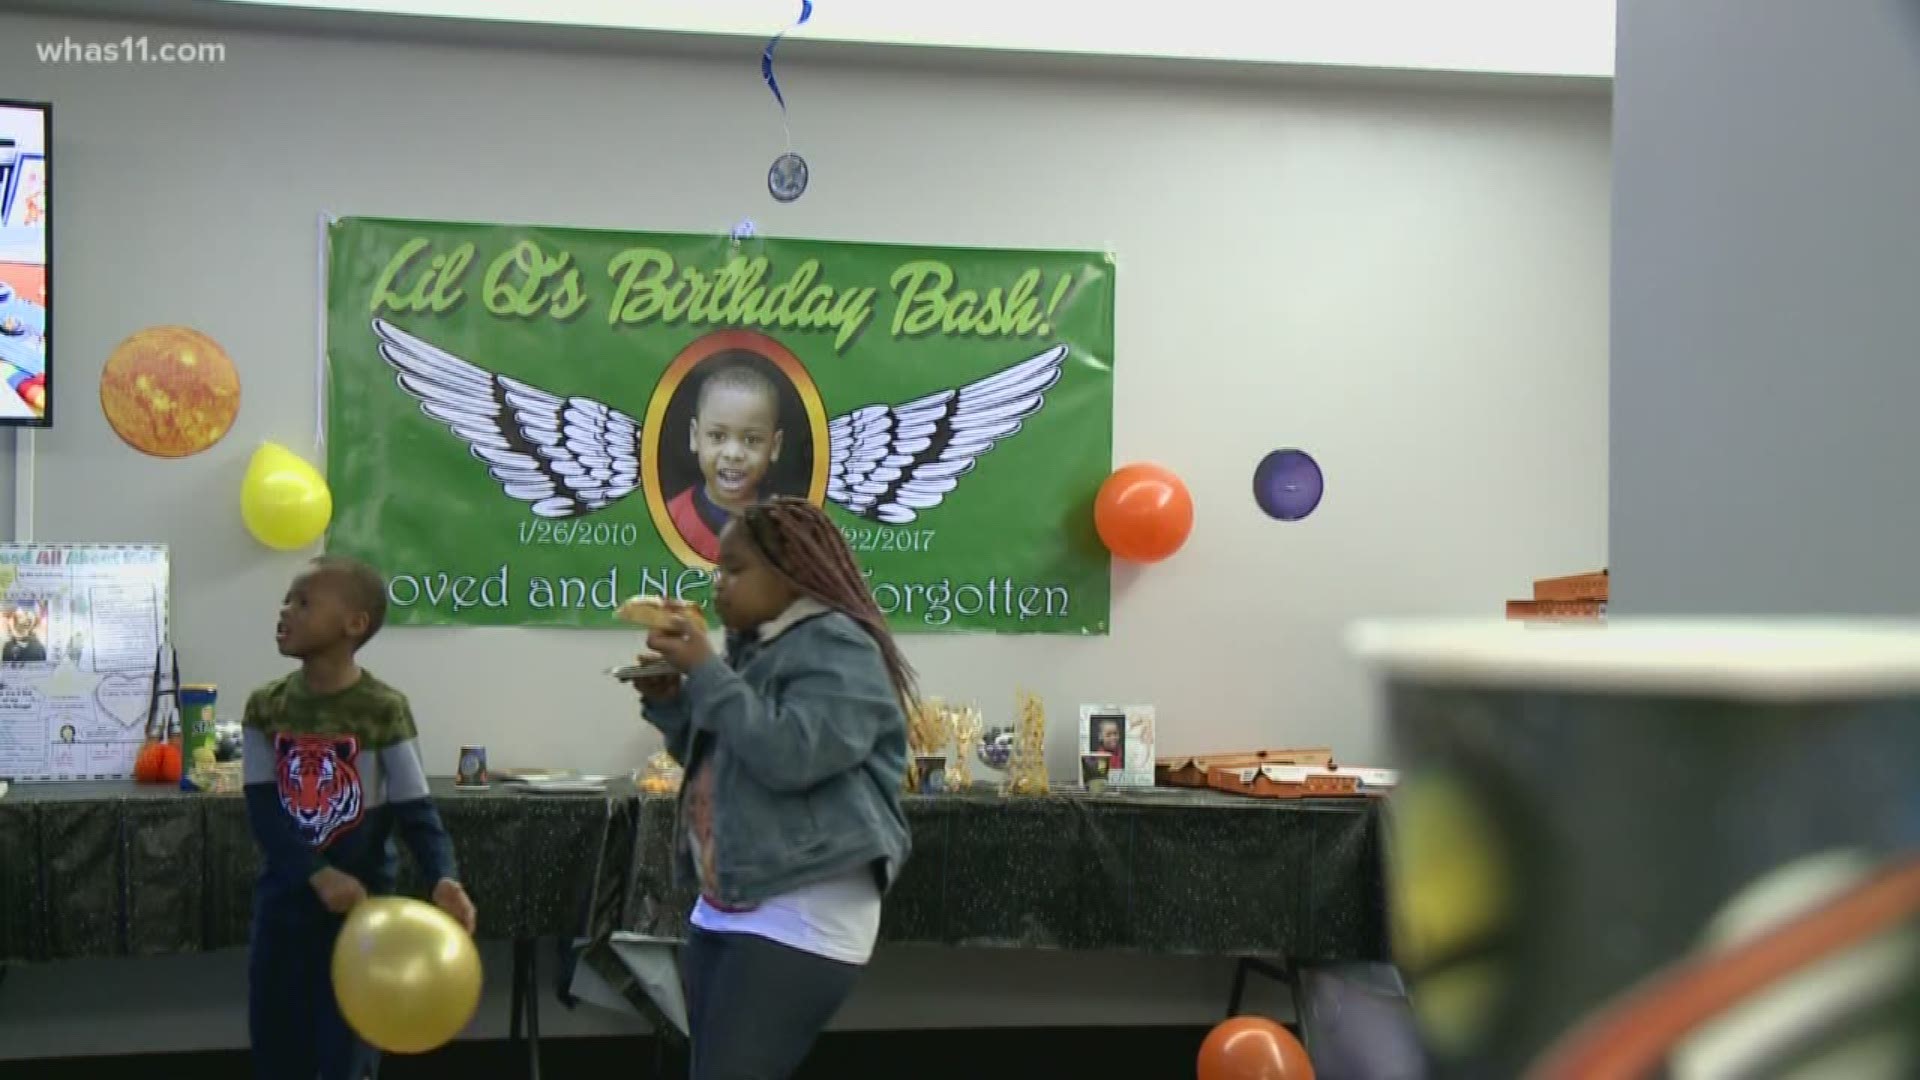 The family of DeQuante Hobbs celebrated what would have been his tenth birthday on Sunday.